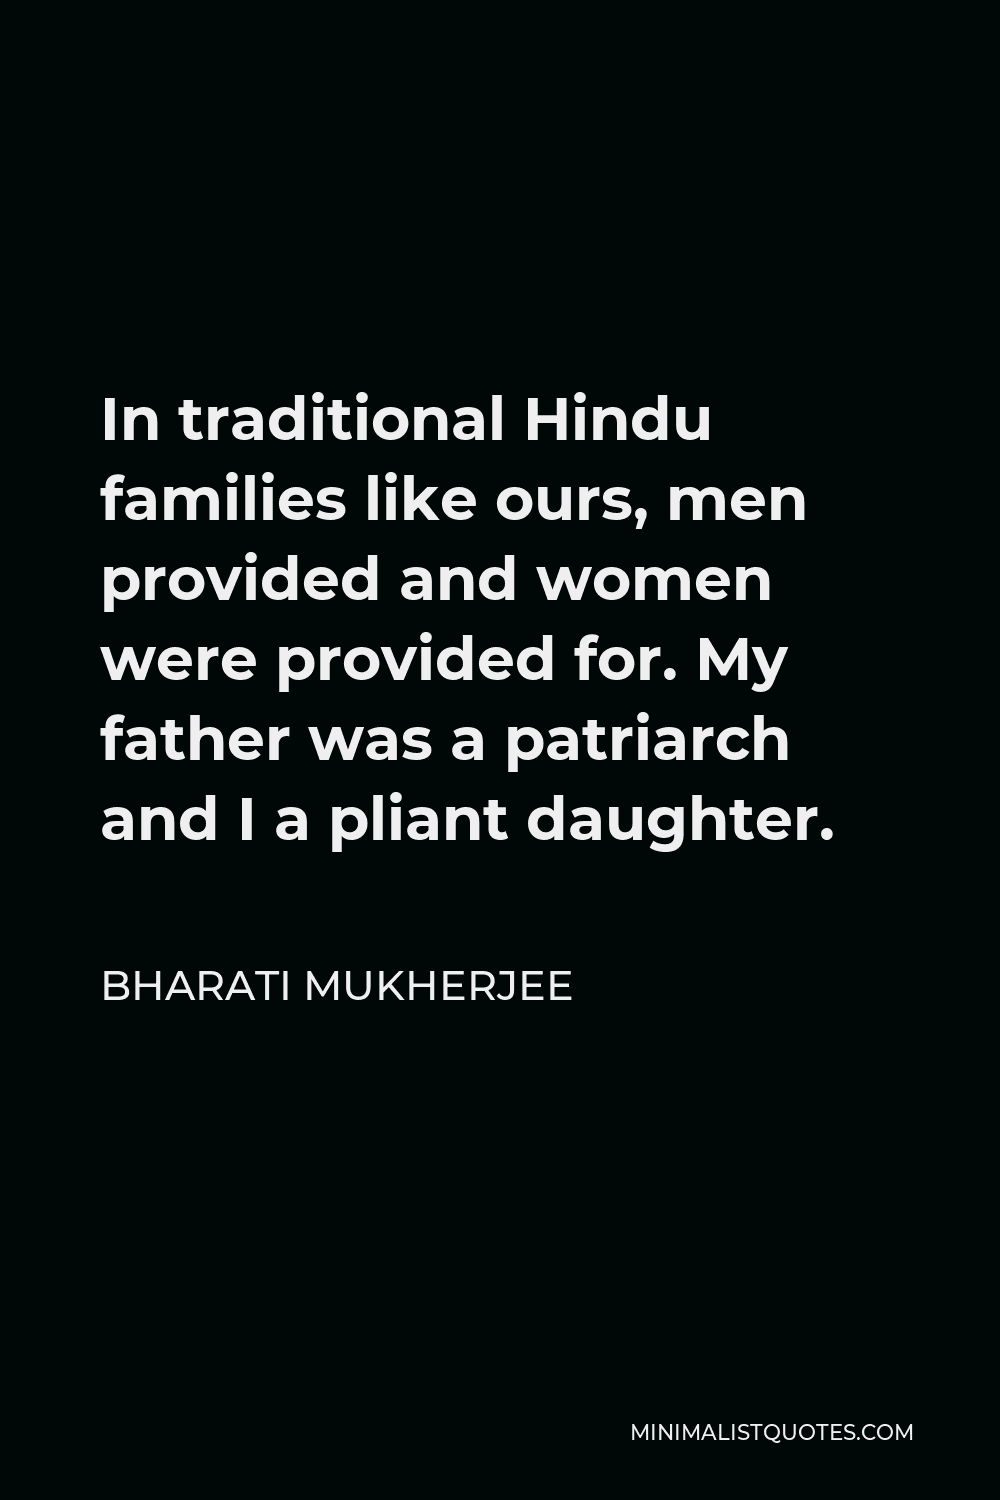 Bharati Mukherjee Quote - In traditional Hindu families like ours, men provided and women were provided for. My father was a patriarch and I a pliant daughter.